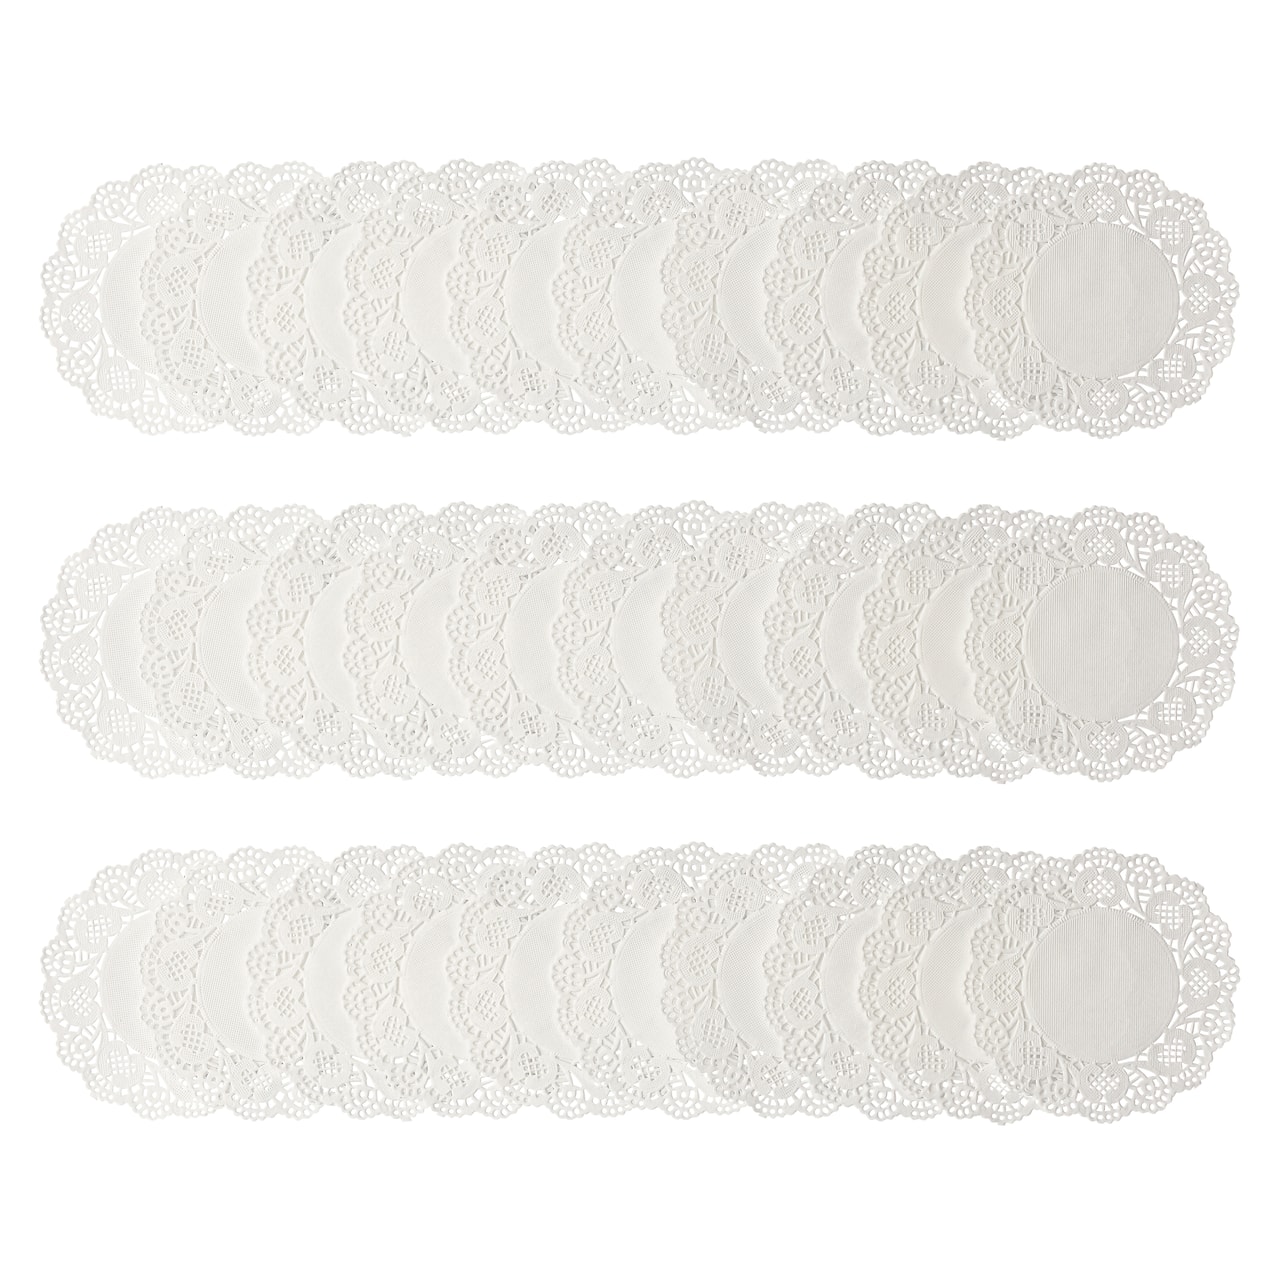 12 Packs: 30 ct. (360 total) 4 Paper Doilies by Celebrate It®